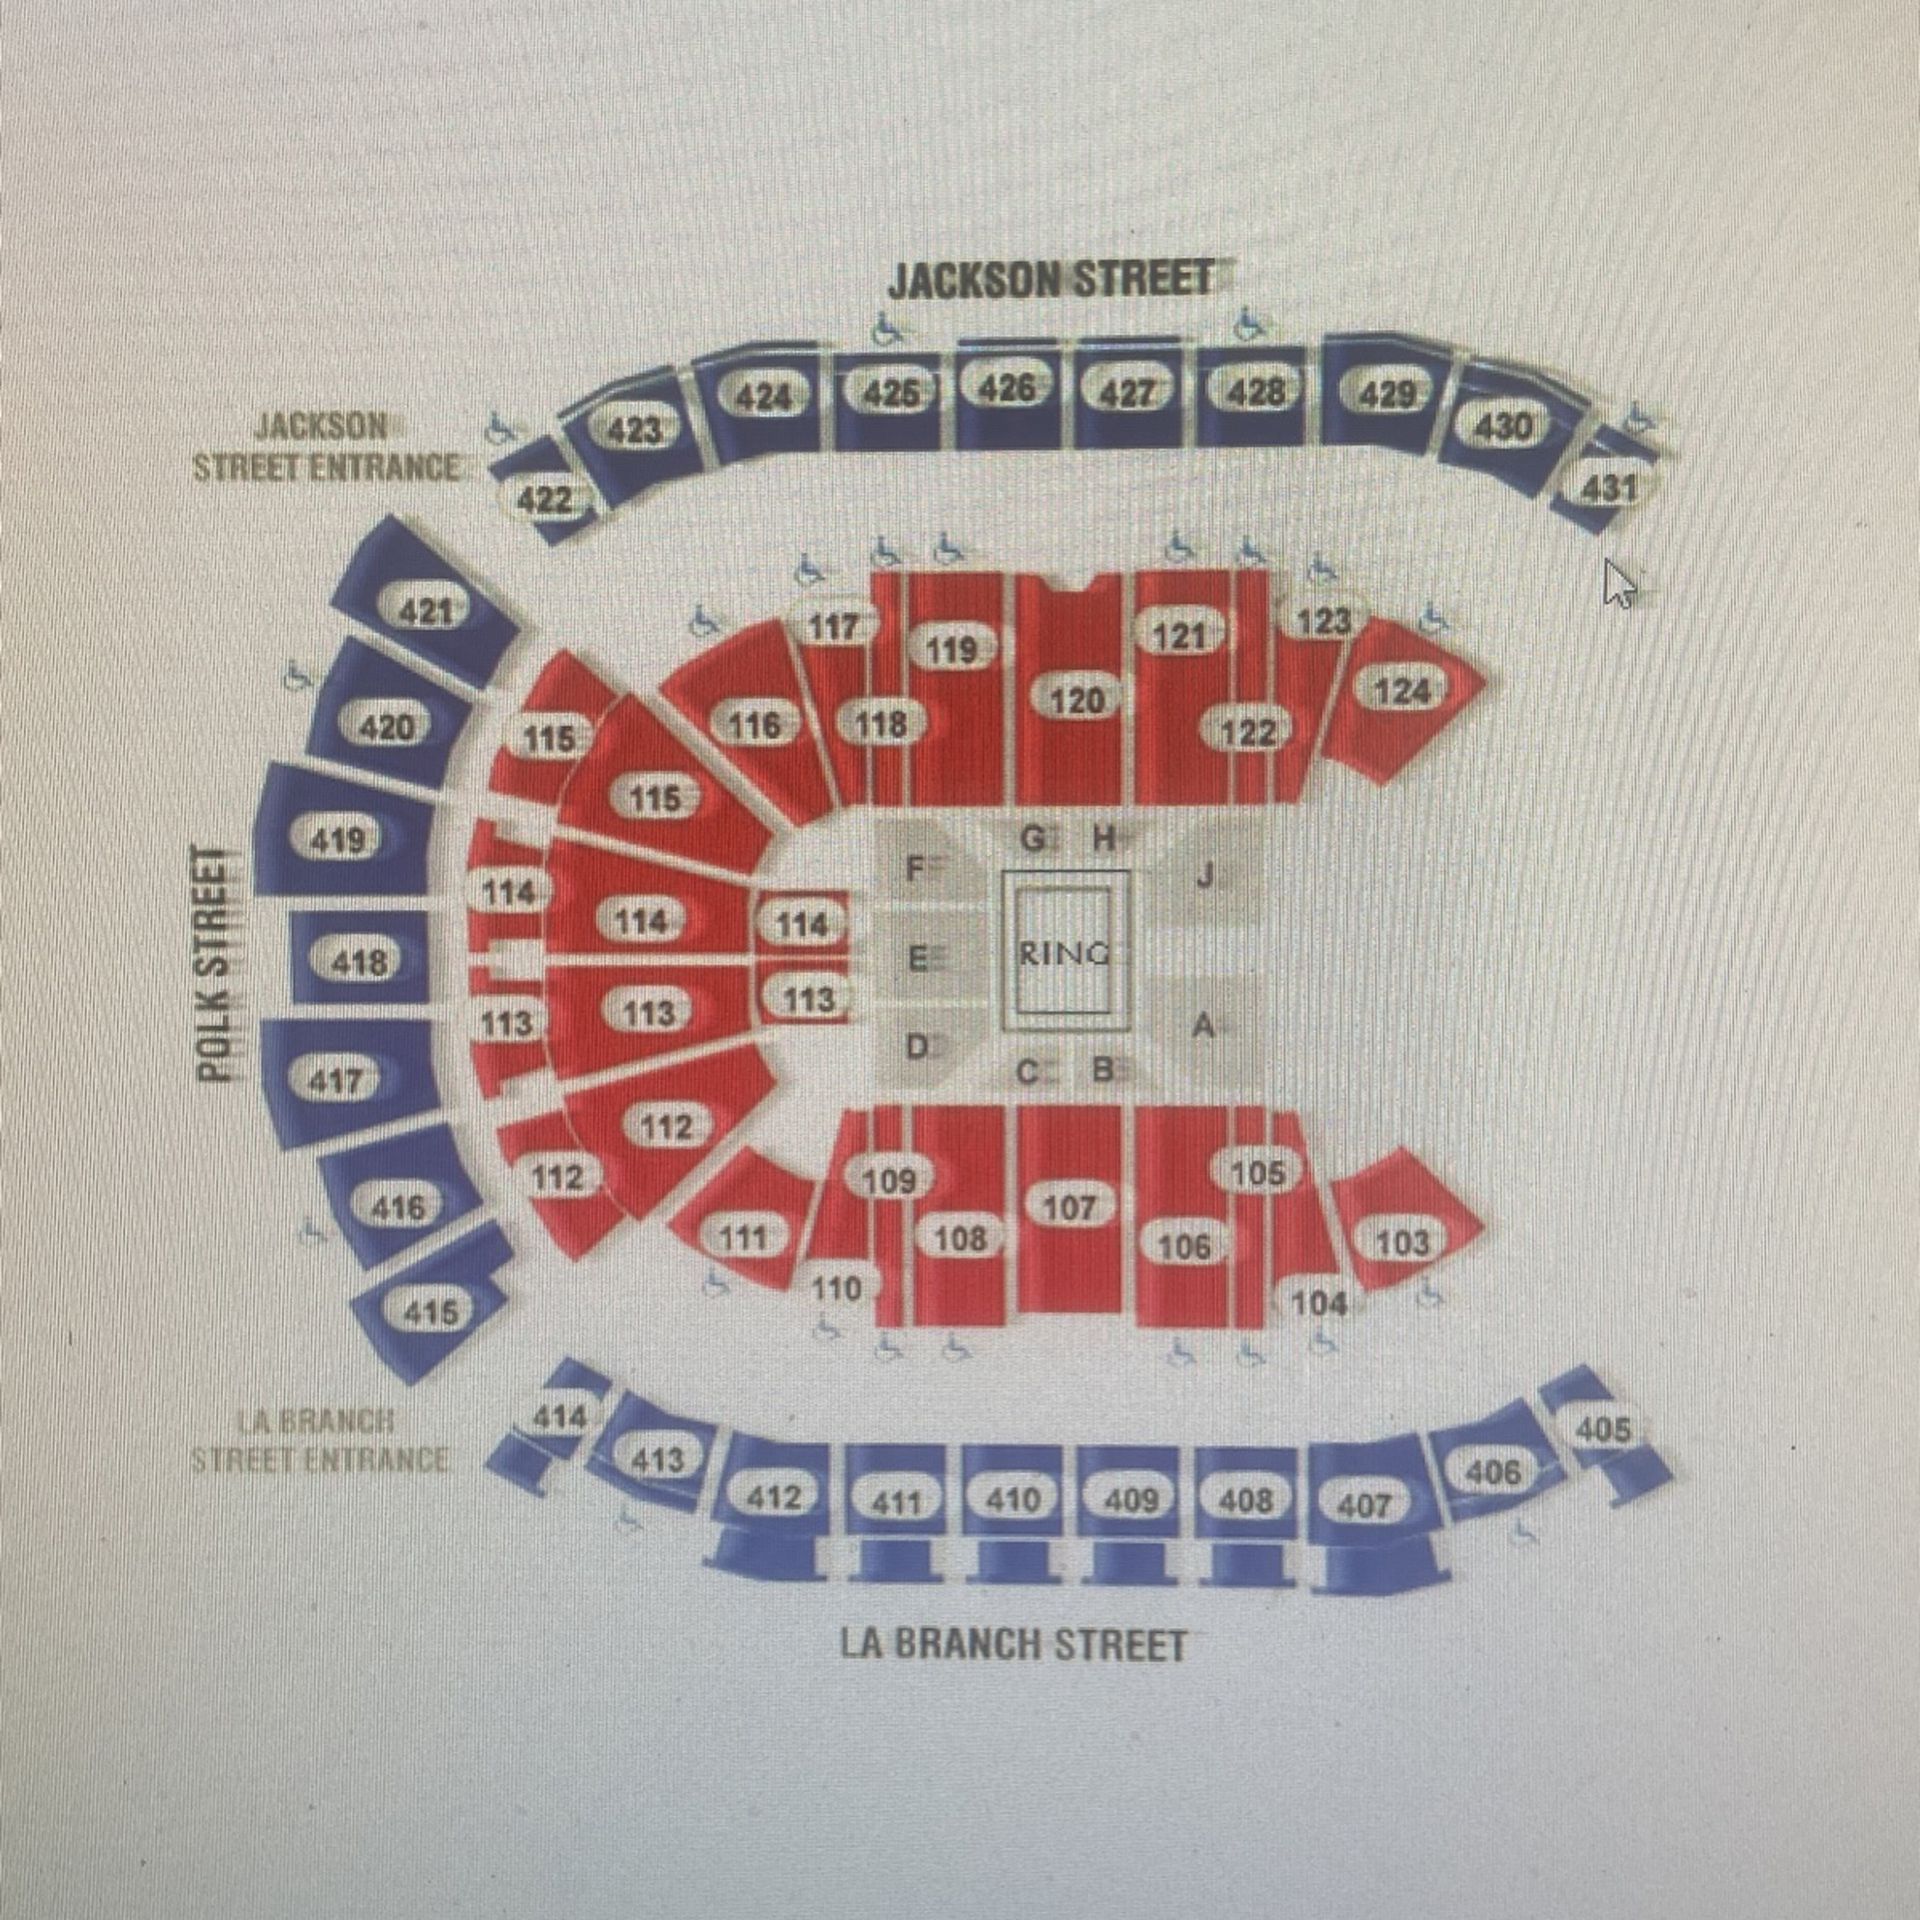 1-10 Tickets  WWE Raw  Lower Level Center 10/25 Sect 114 Row 25